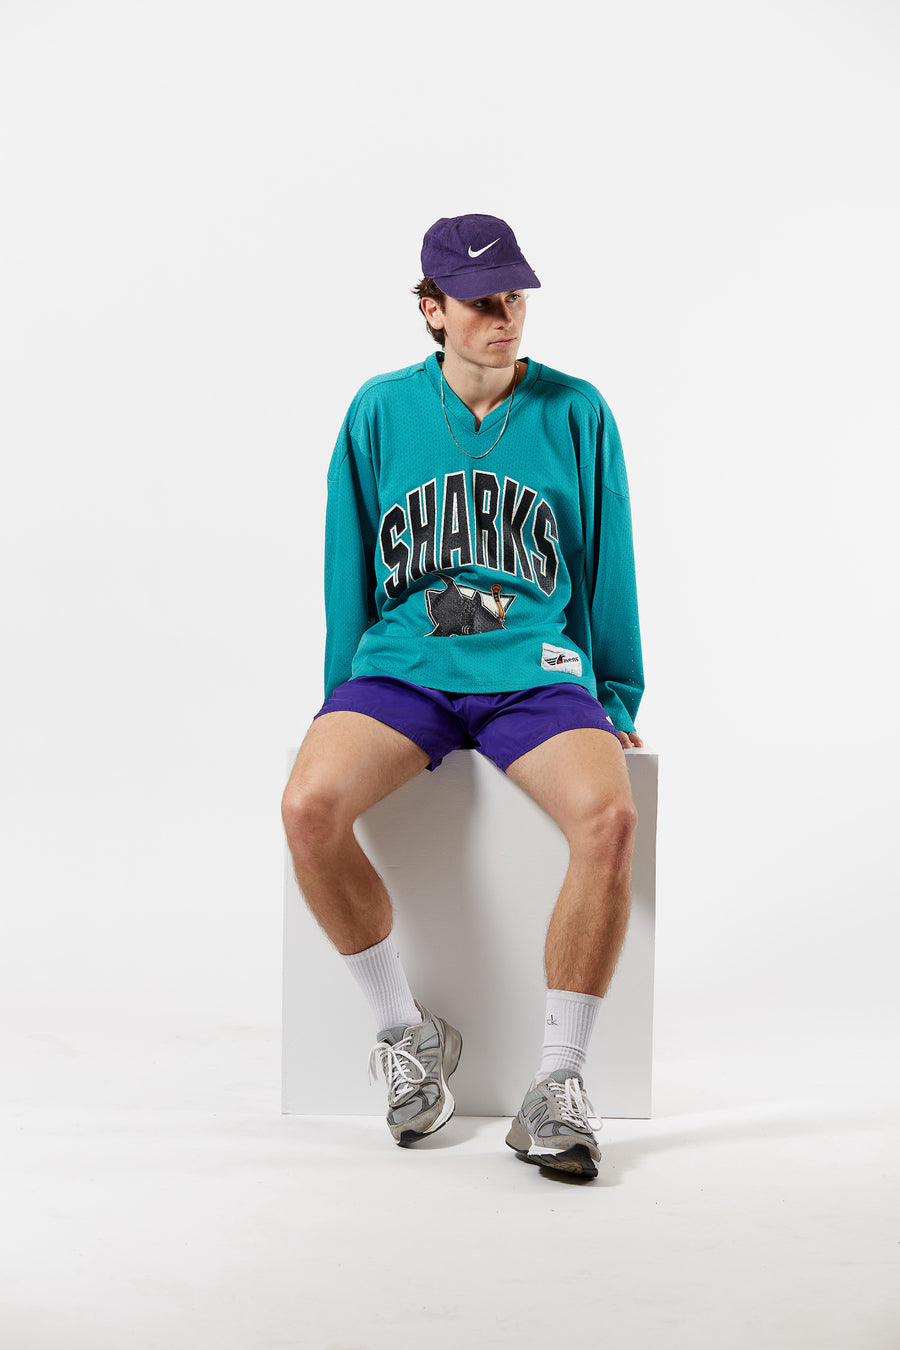 90's San Jose Sharks NHL Jersey in a vintage style from thrift store Twise Studio